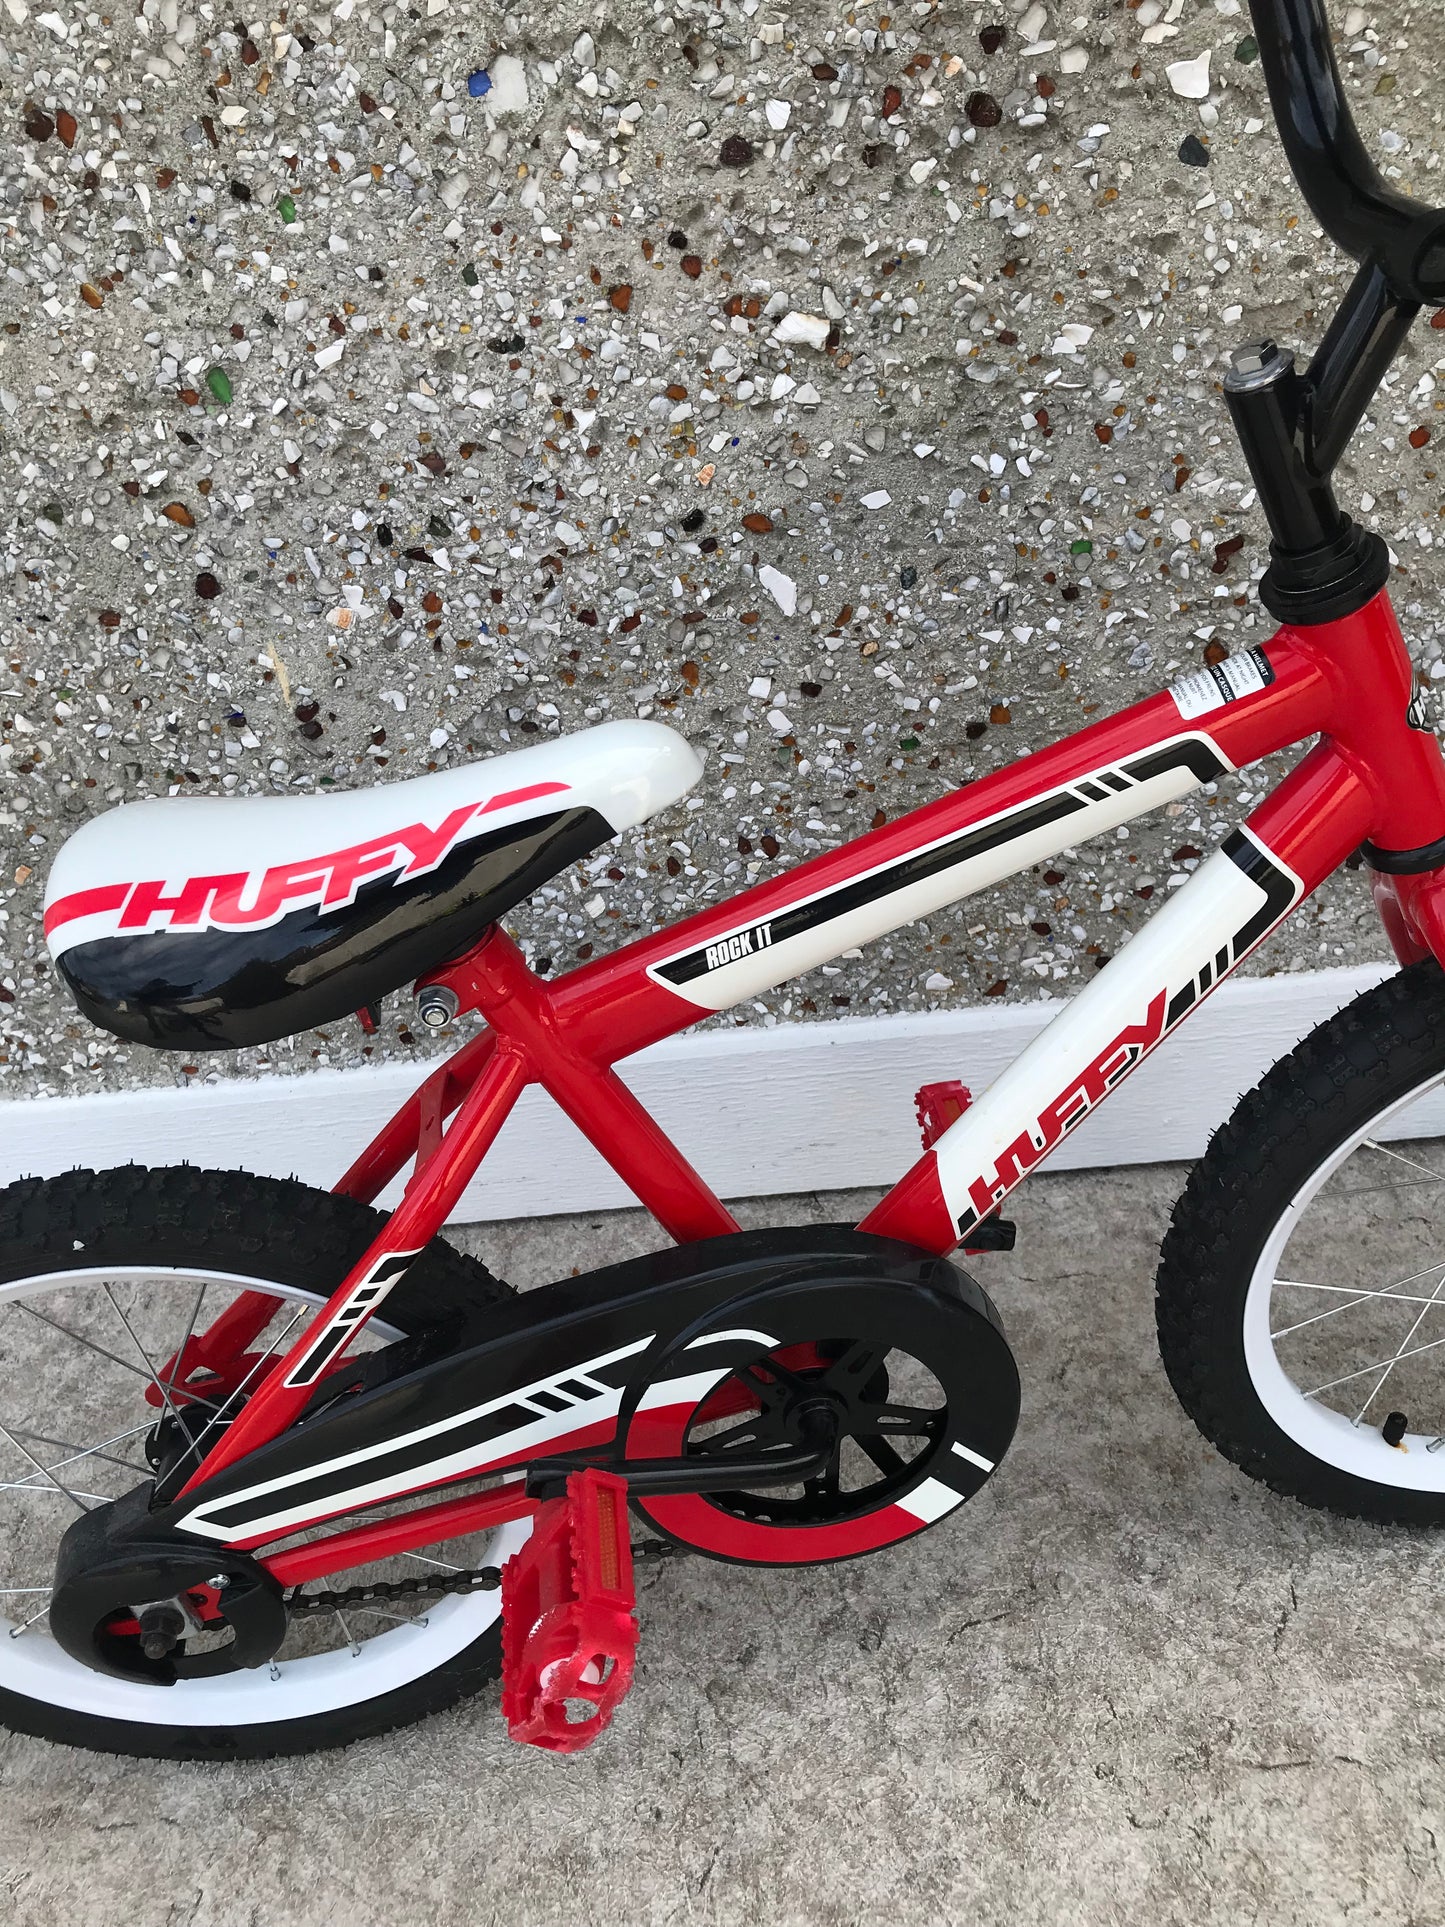 Bike Child Size 16 inch Huffy Red White As New